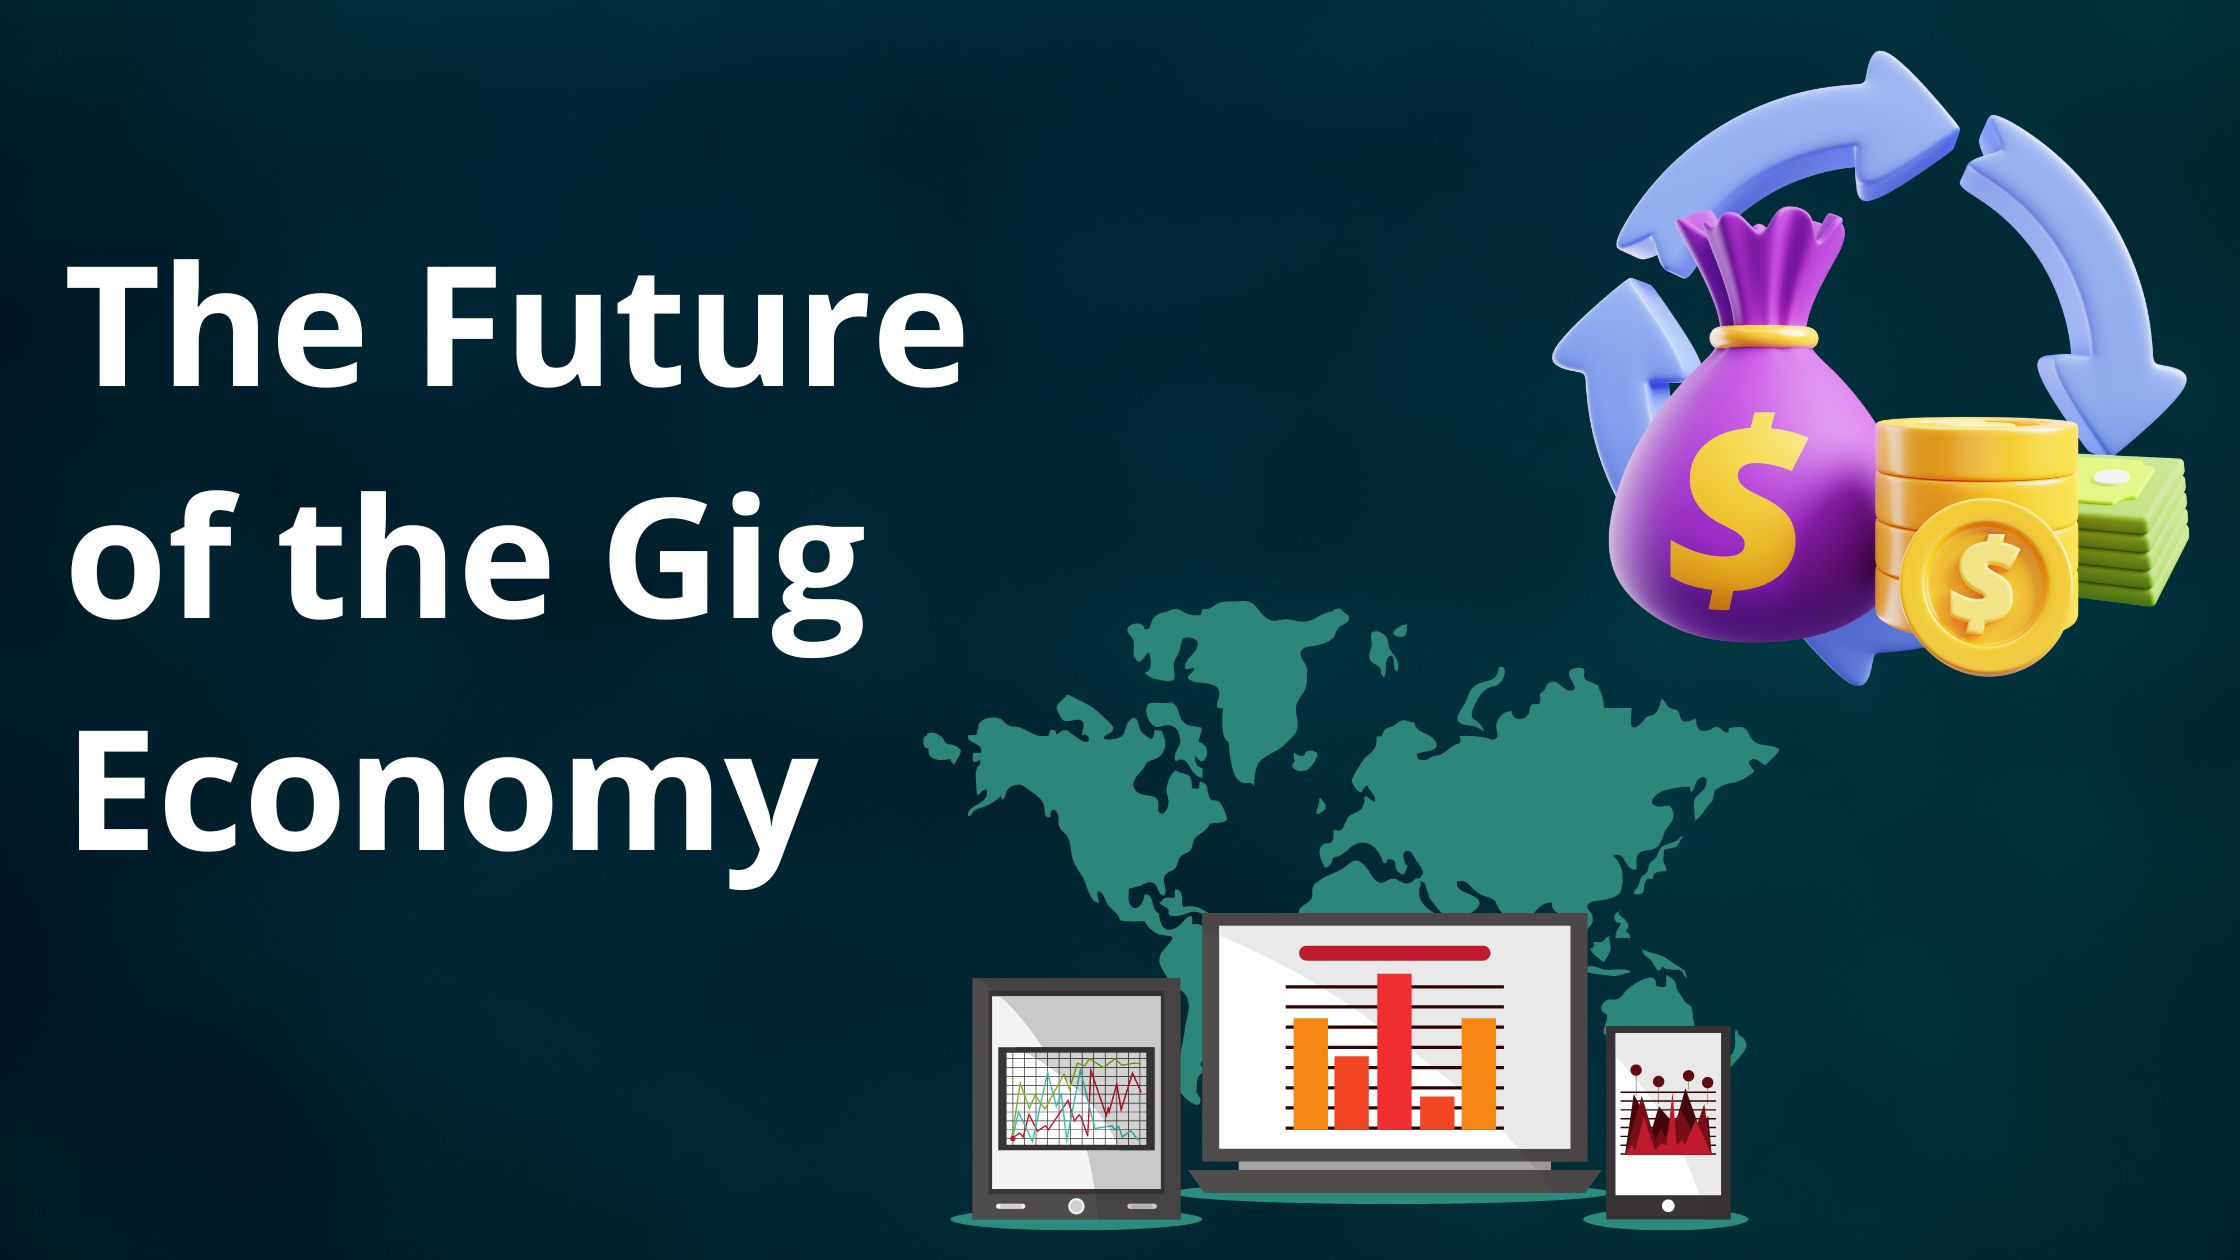 The future of the gig economy